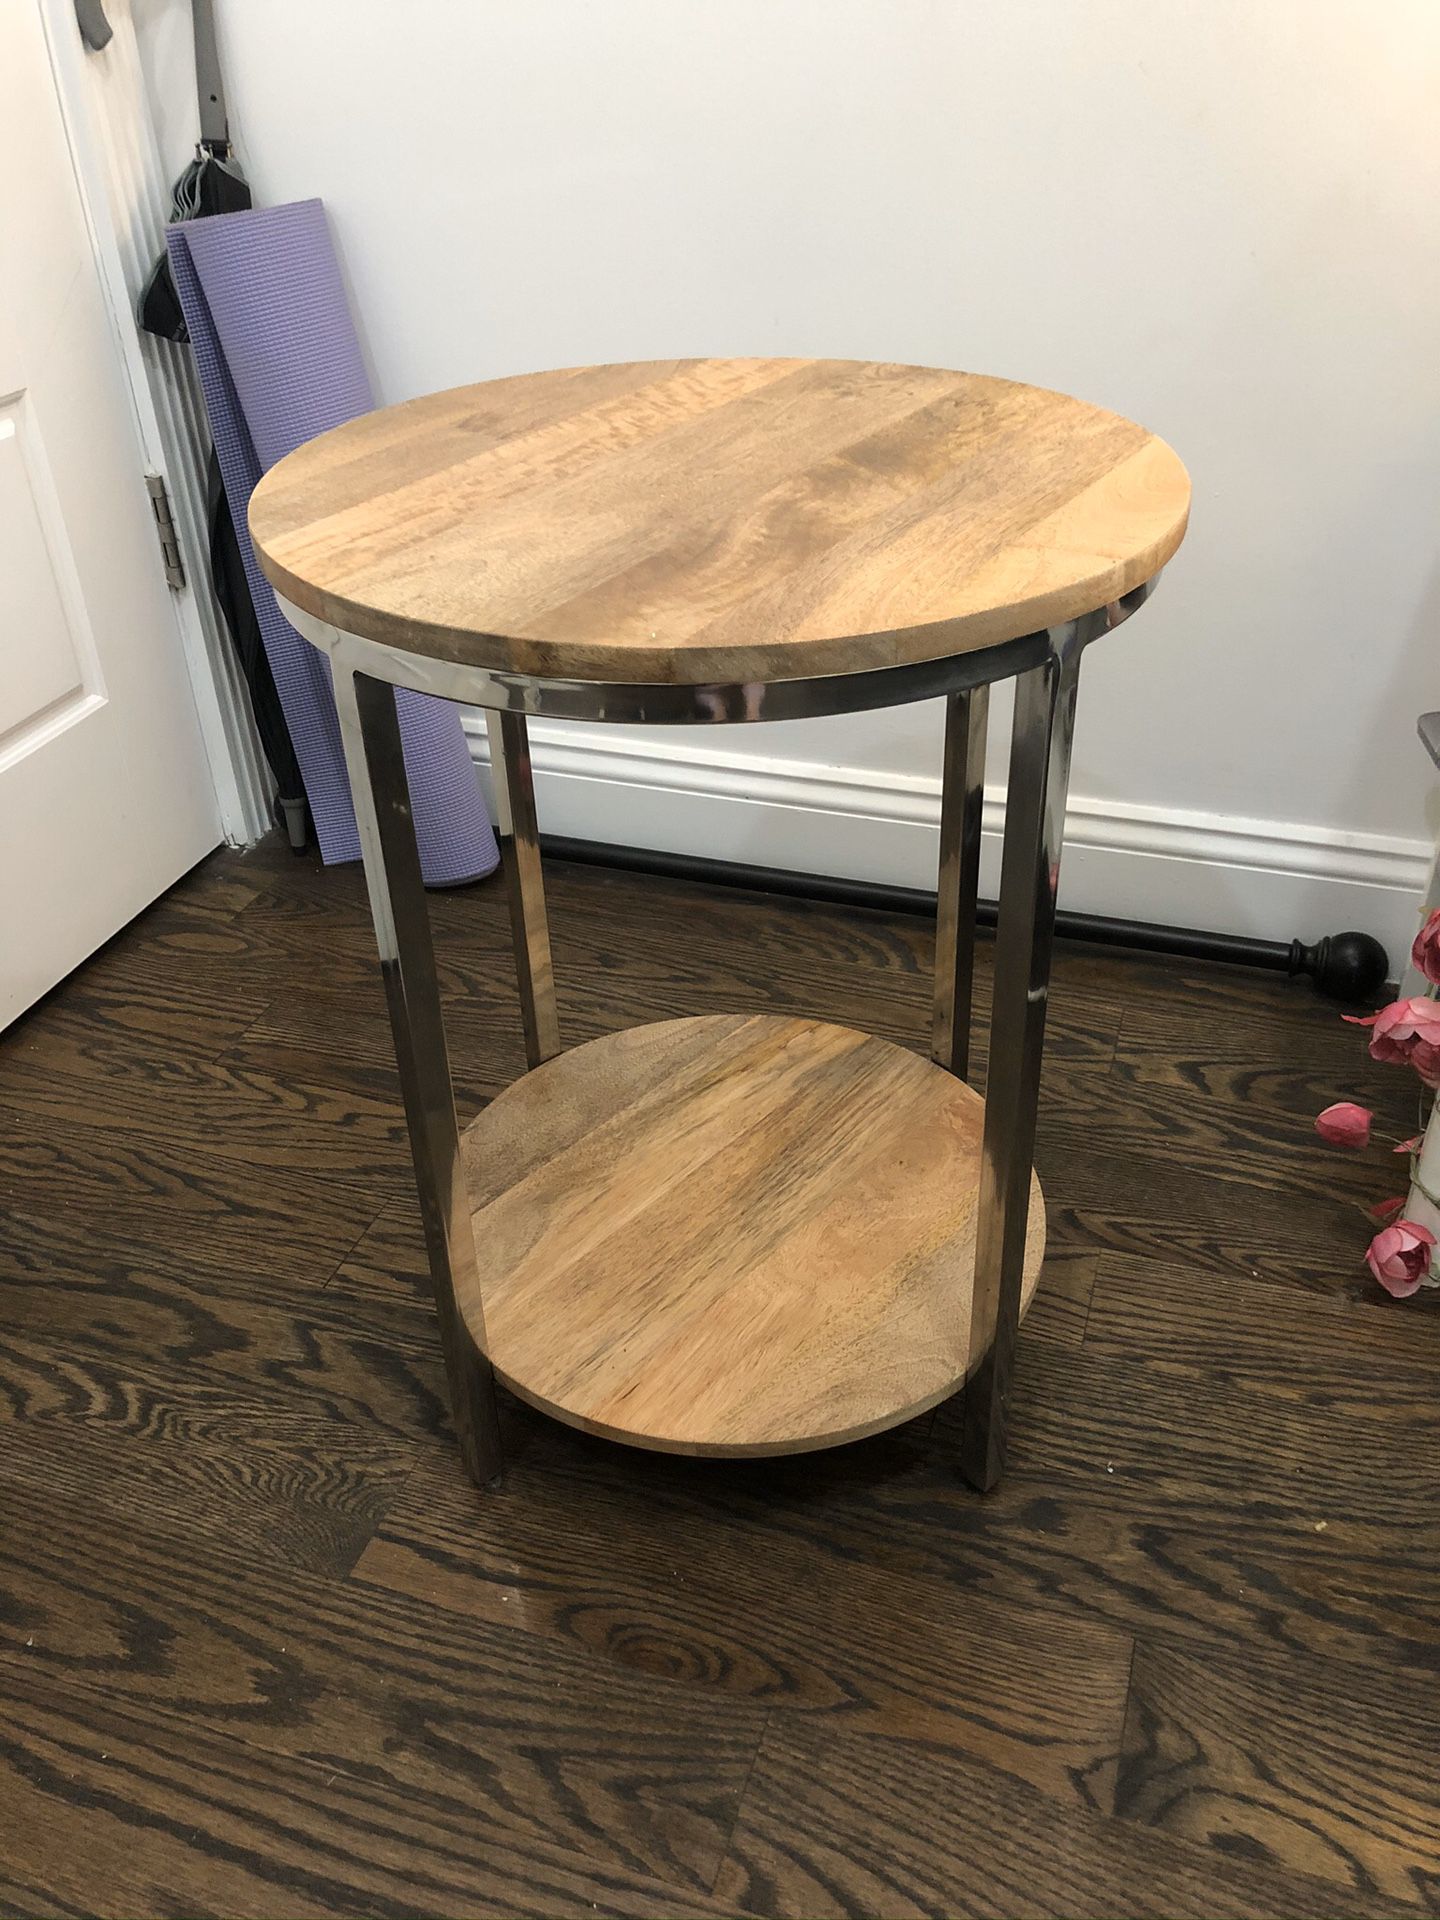 Wooden side table - hardly used!!